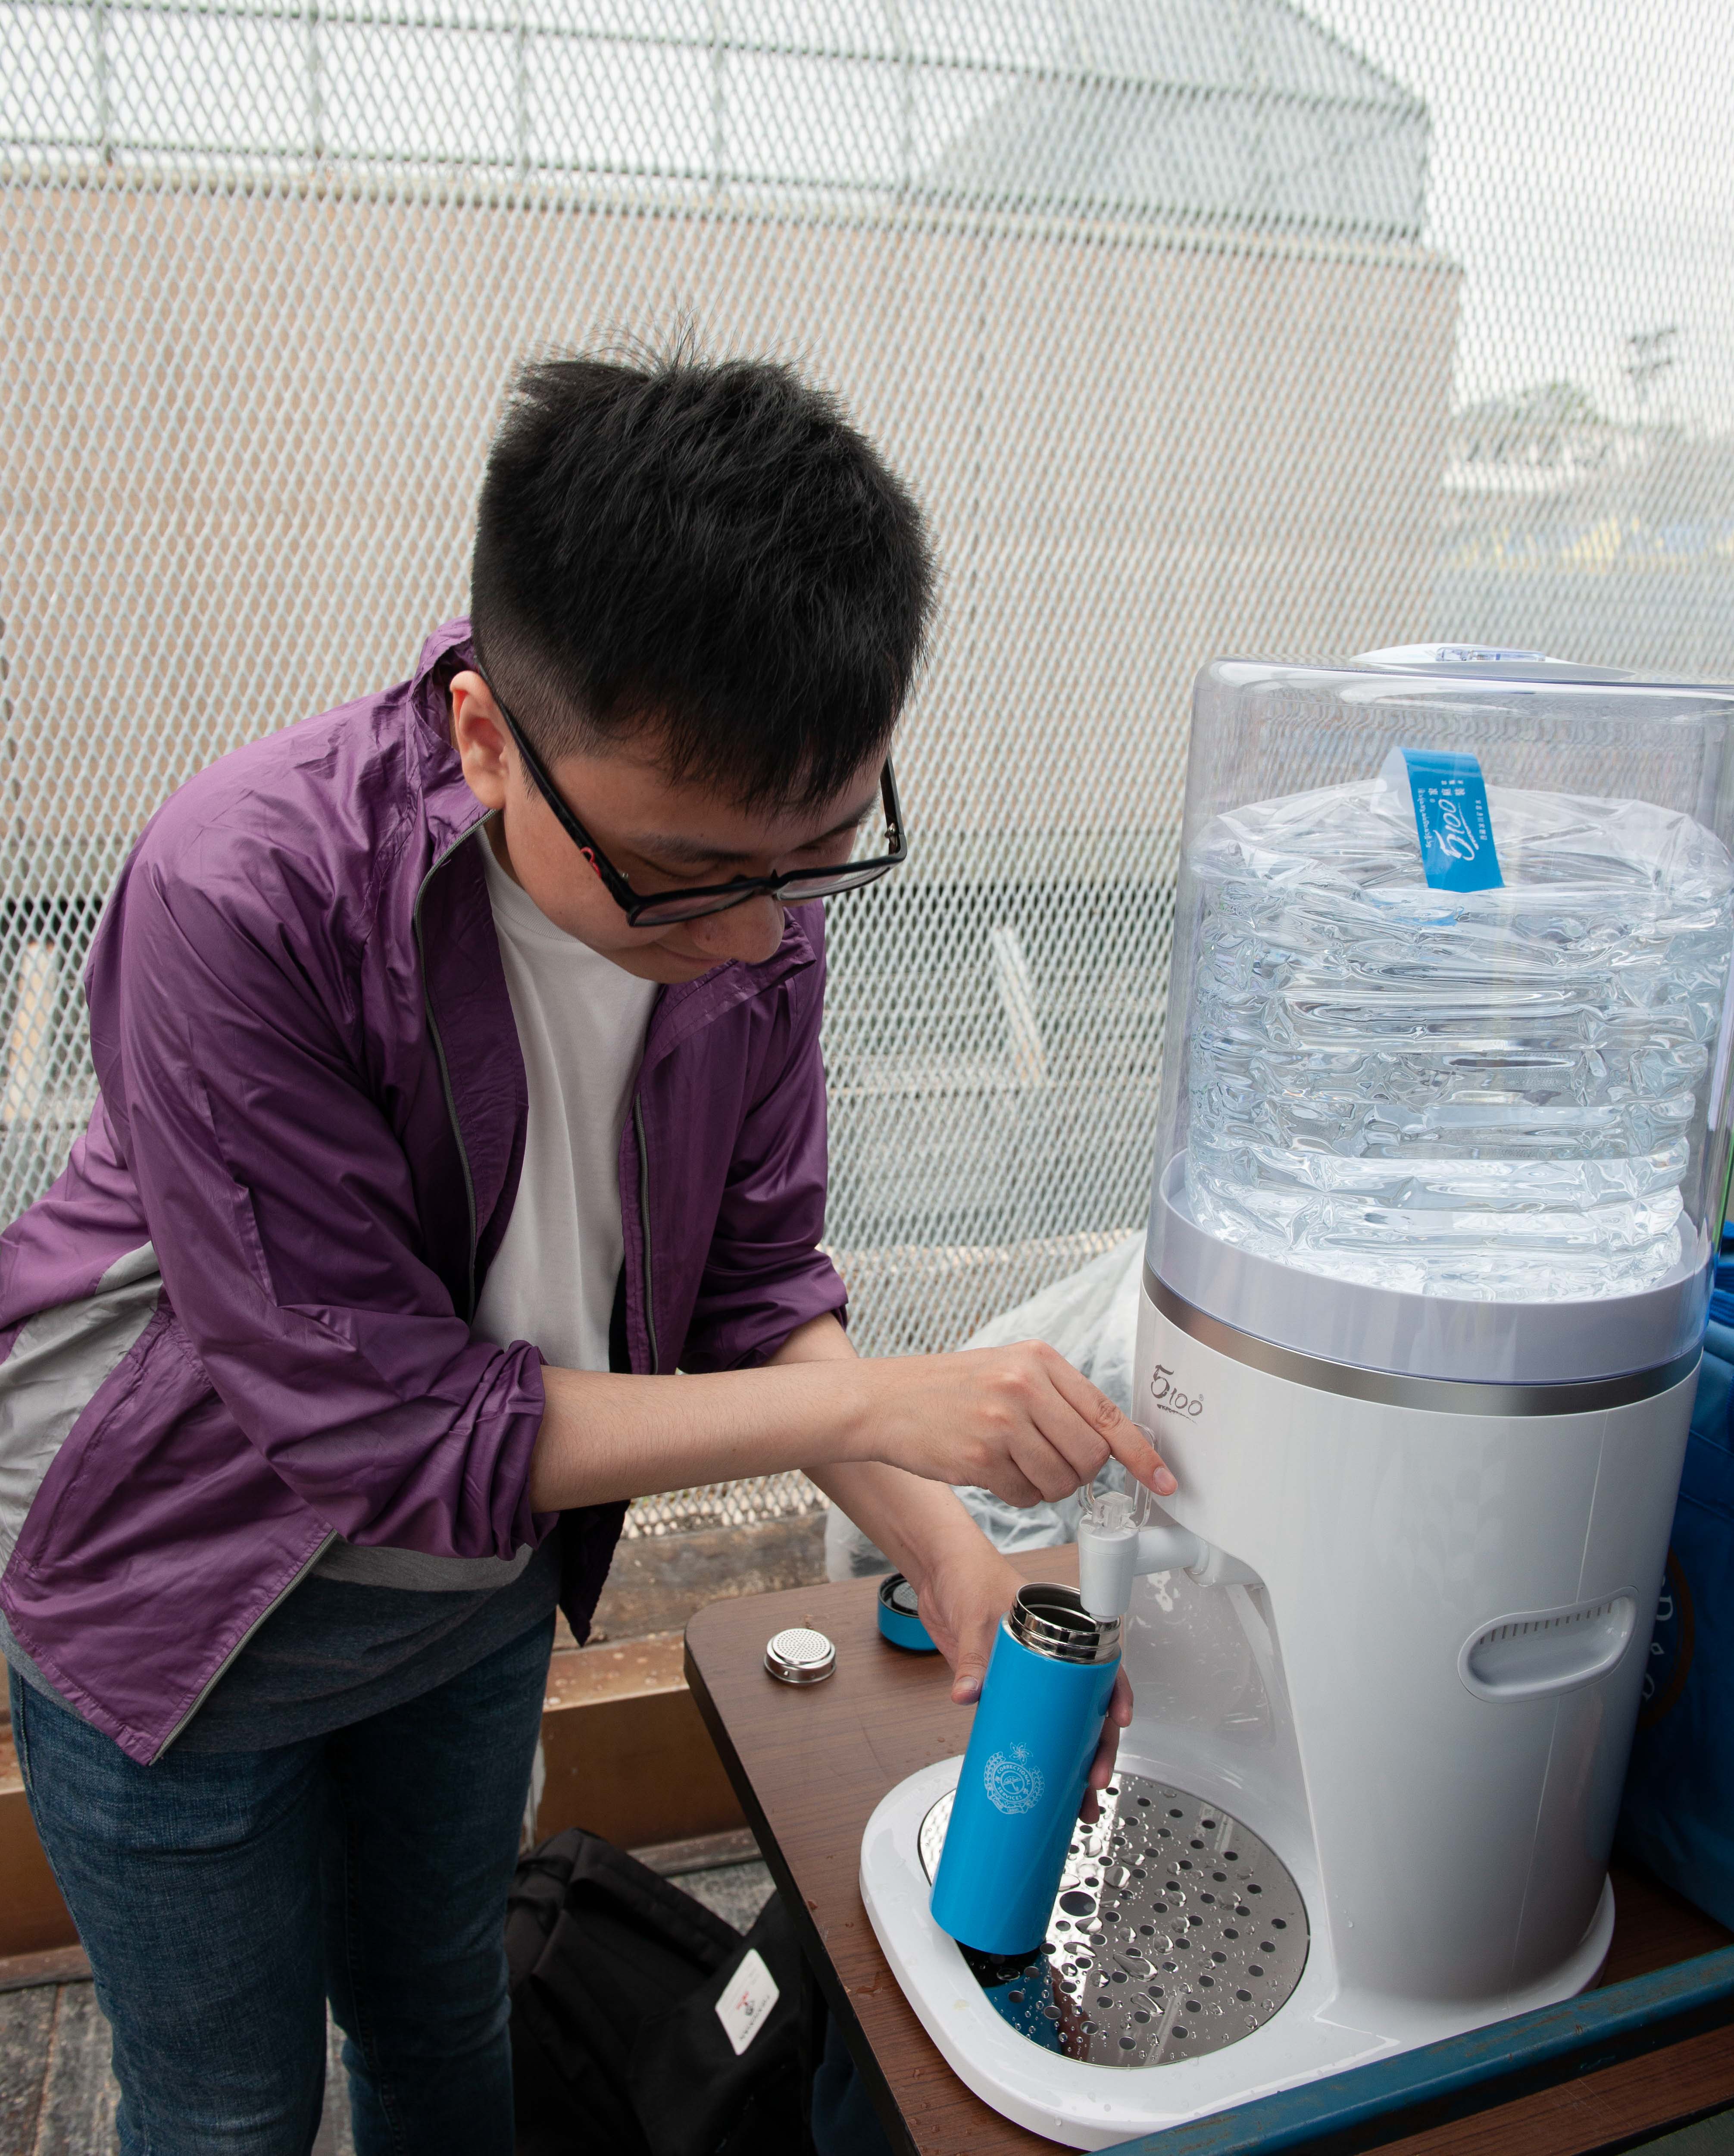 Staff refill their own bottles at water points.